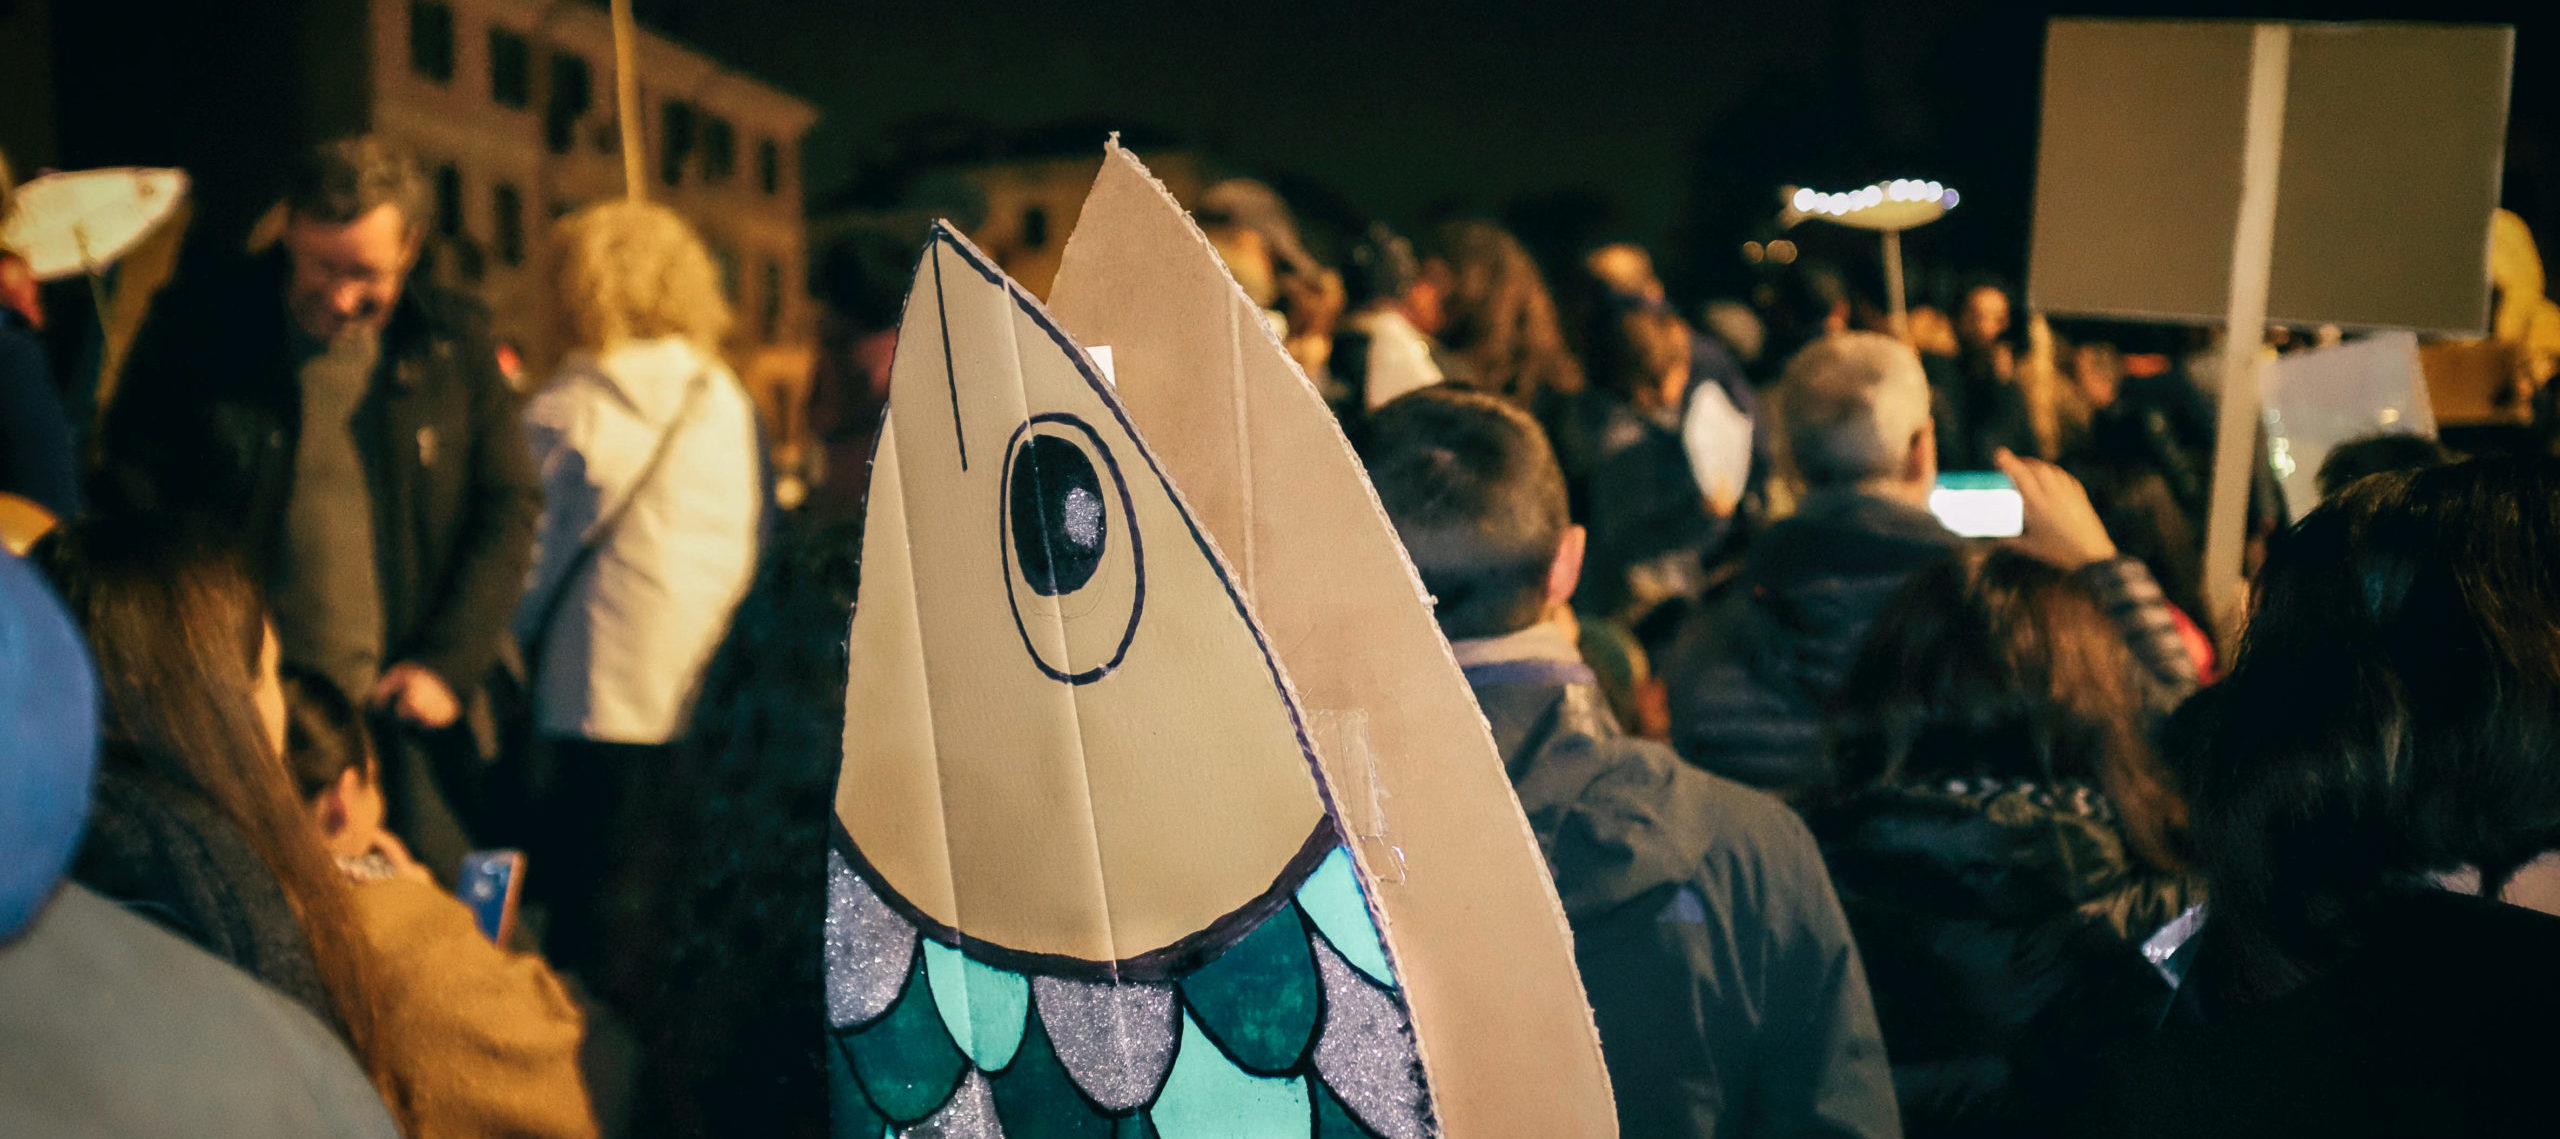 Photograph of protestors holding up sardine-shaped signs at a flash mob in Verona, Italy.